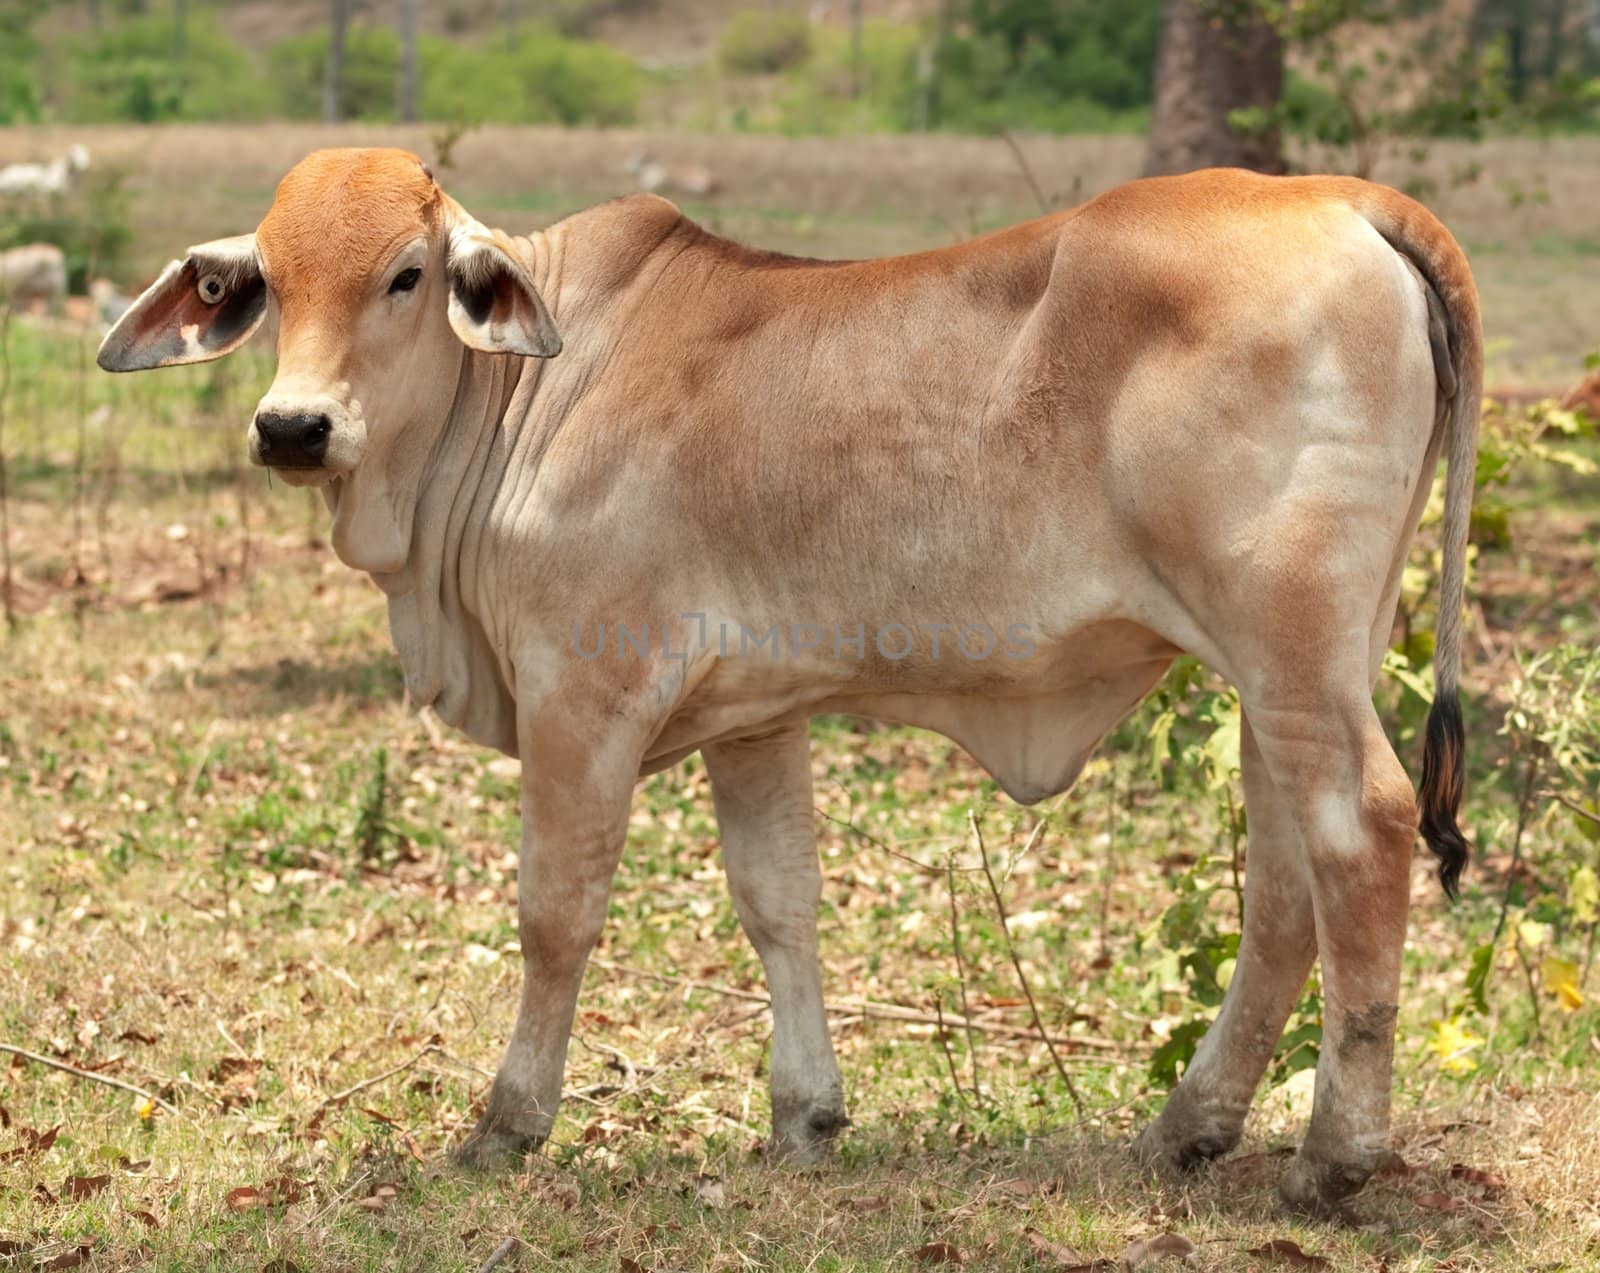 Young brahman calf  beef cattle solitary in field on australian ranch